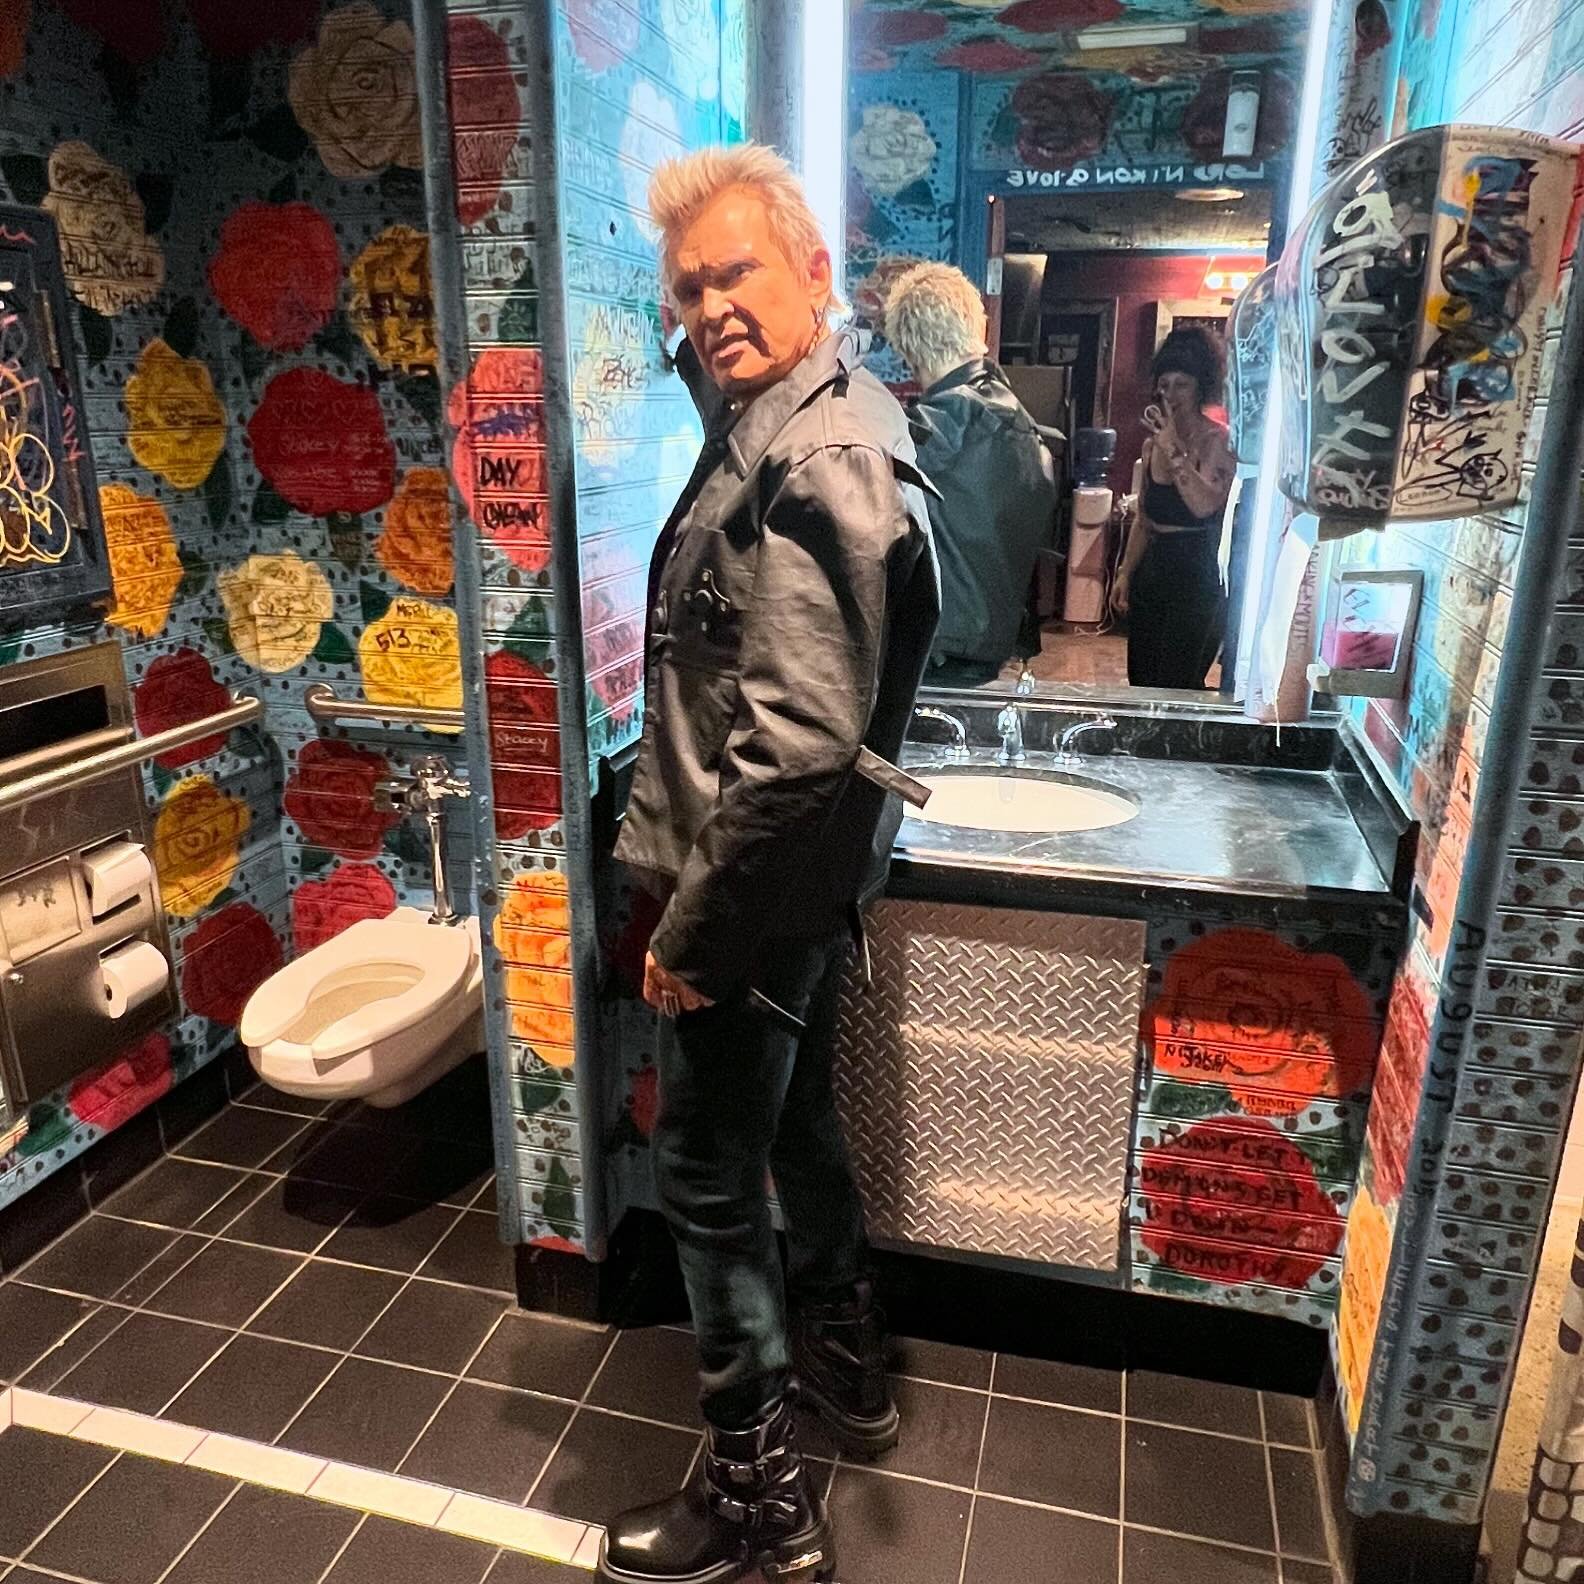 Caught @billyidol tagging the bathroom wall in the dressing room here at the @hobchicago . He&rsquo;s always getting into something!!! 😈😎⚡️